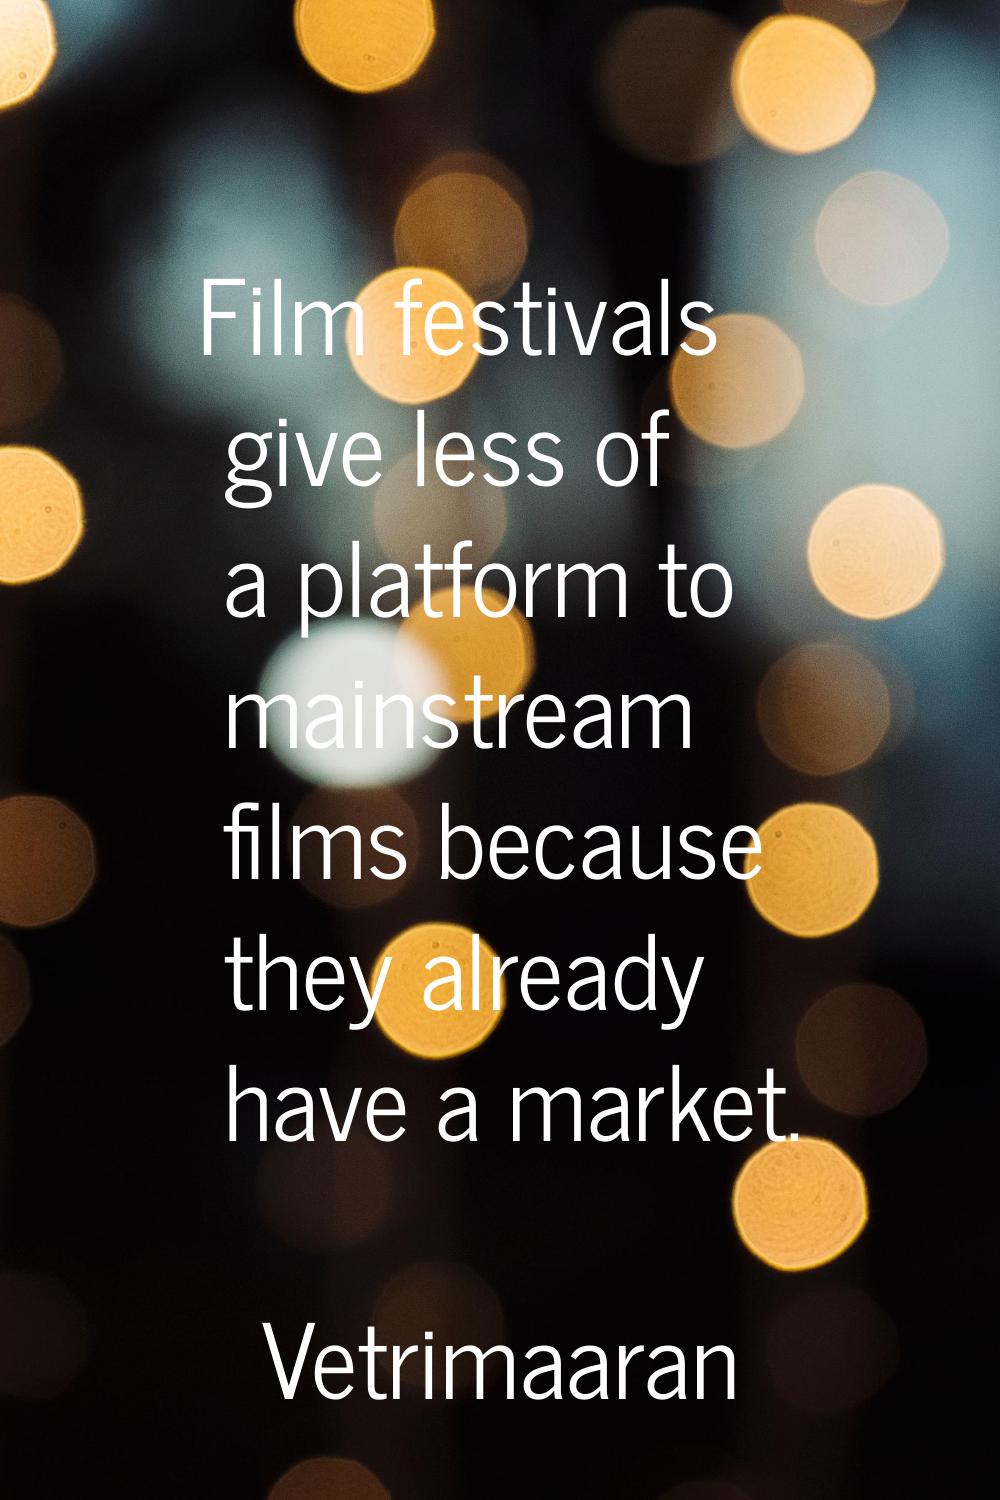 Film festivals give less of a platform to mainstream films because they already have a market.